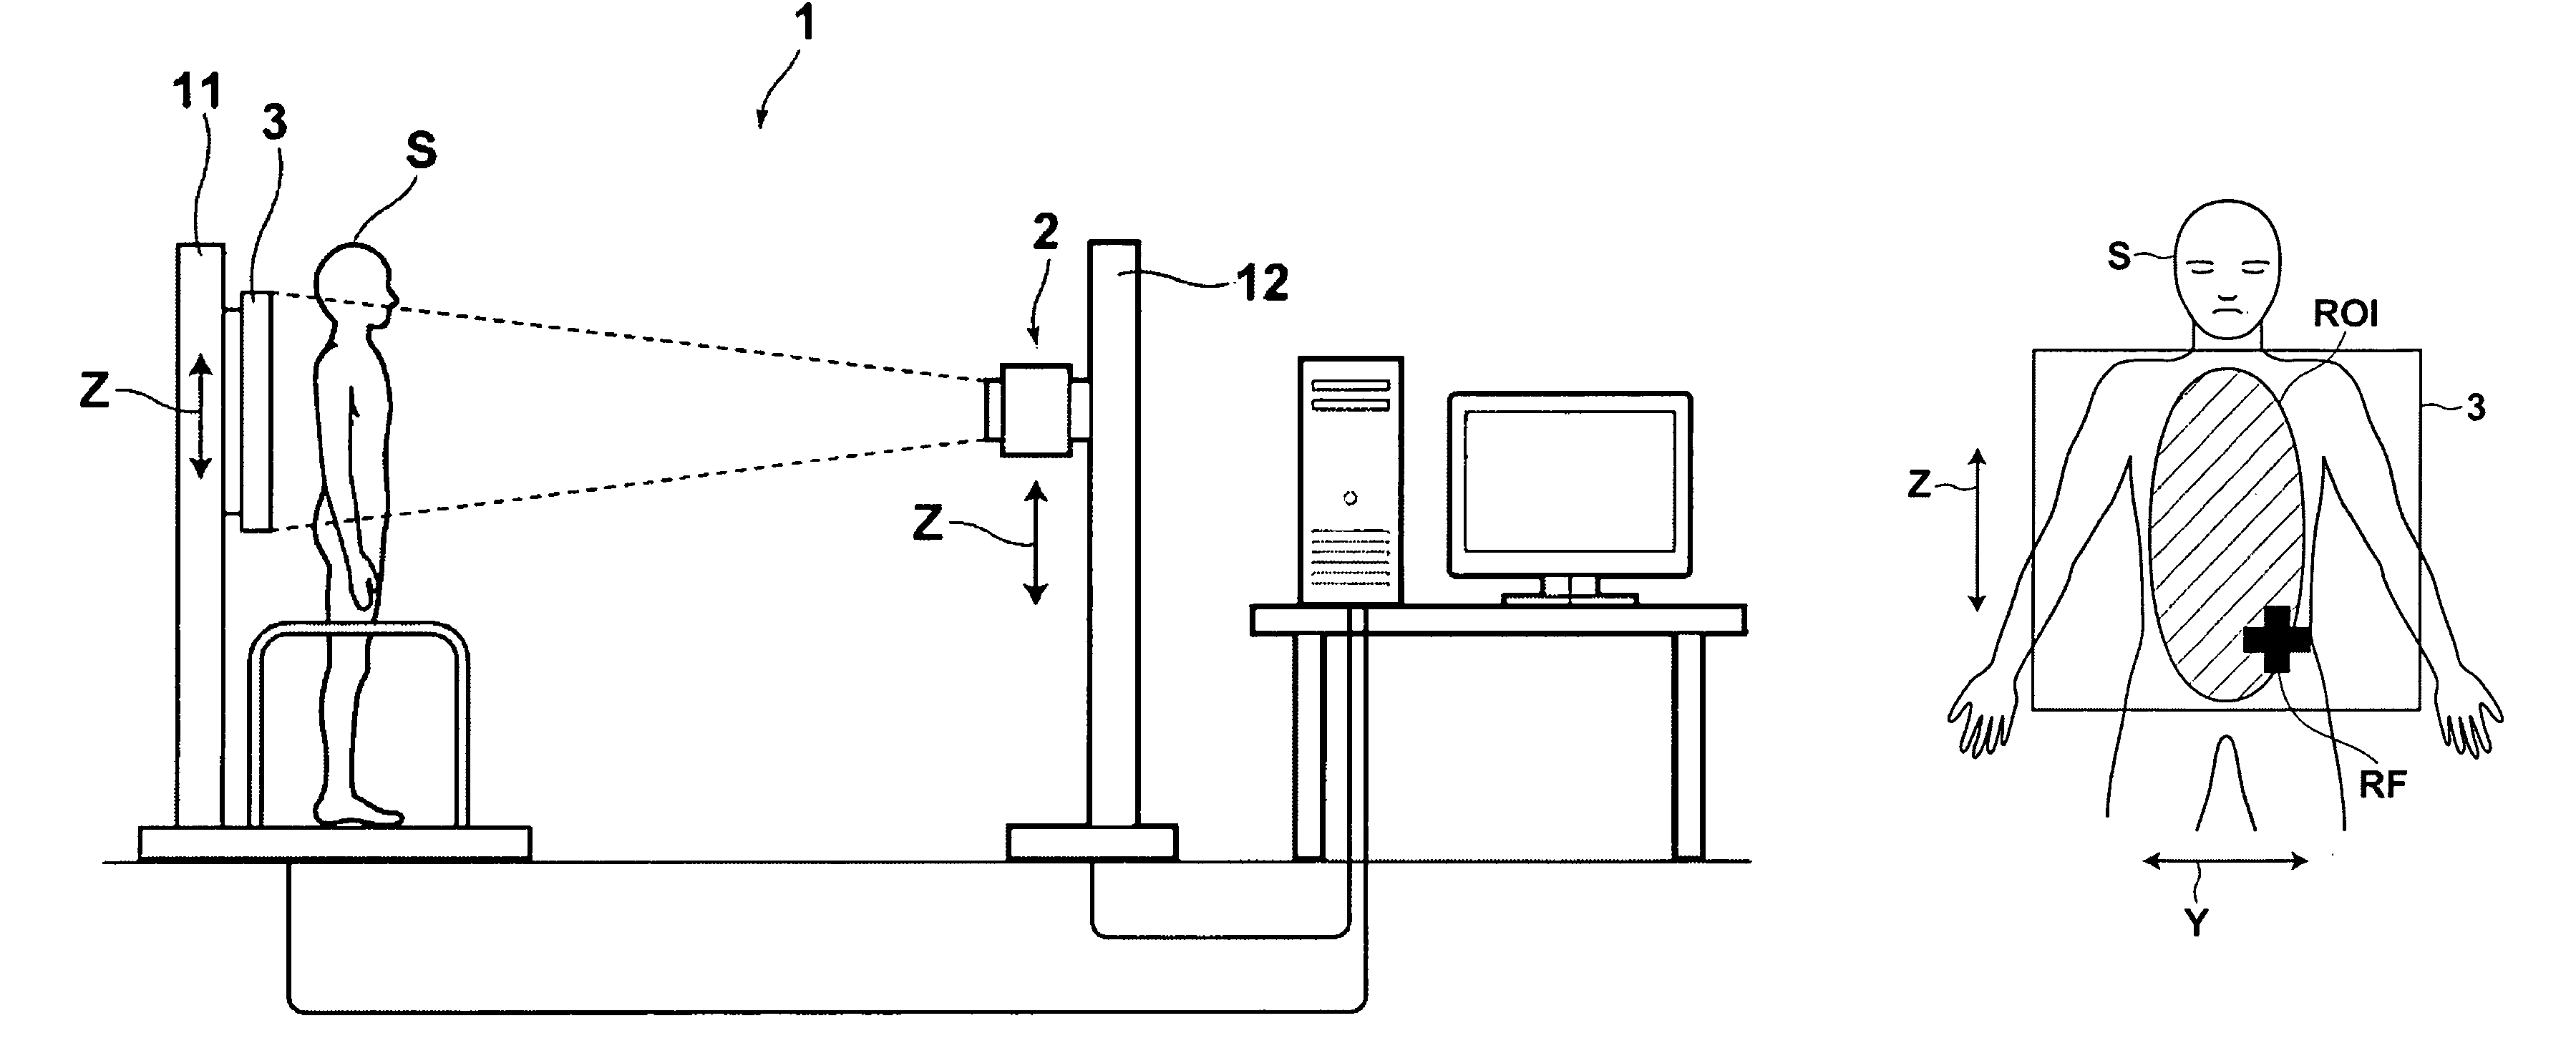 Radiographic image detection apparatus and method for controlling the apparatus